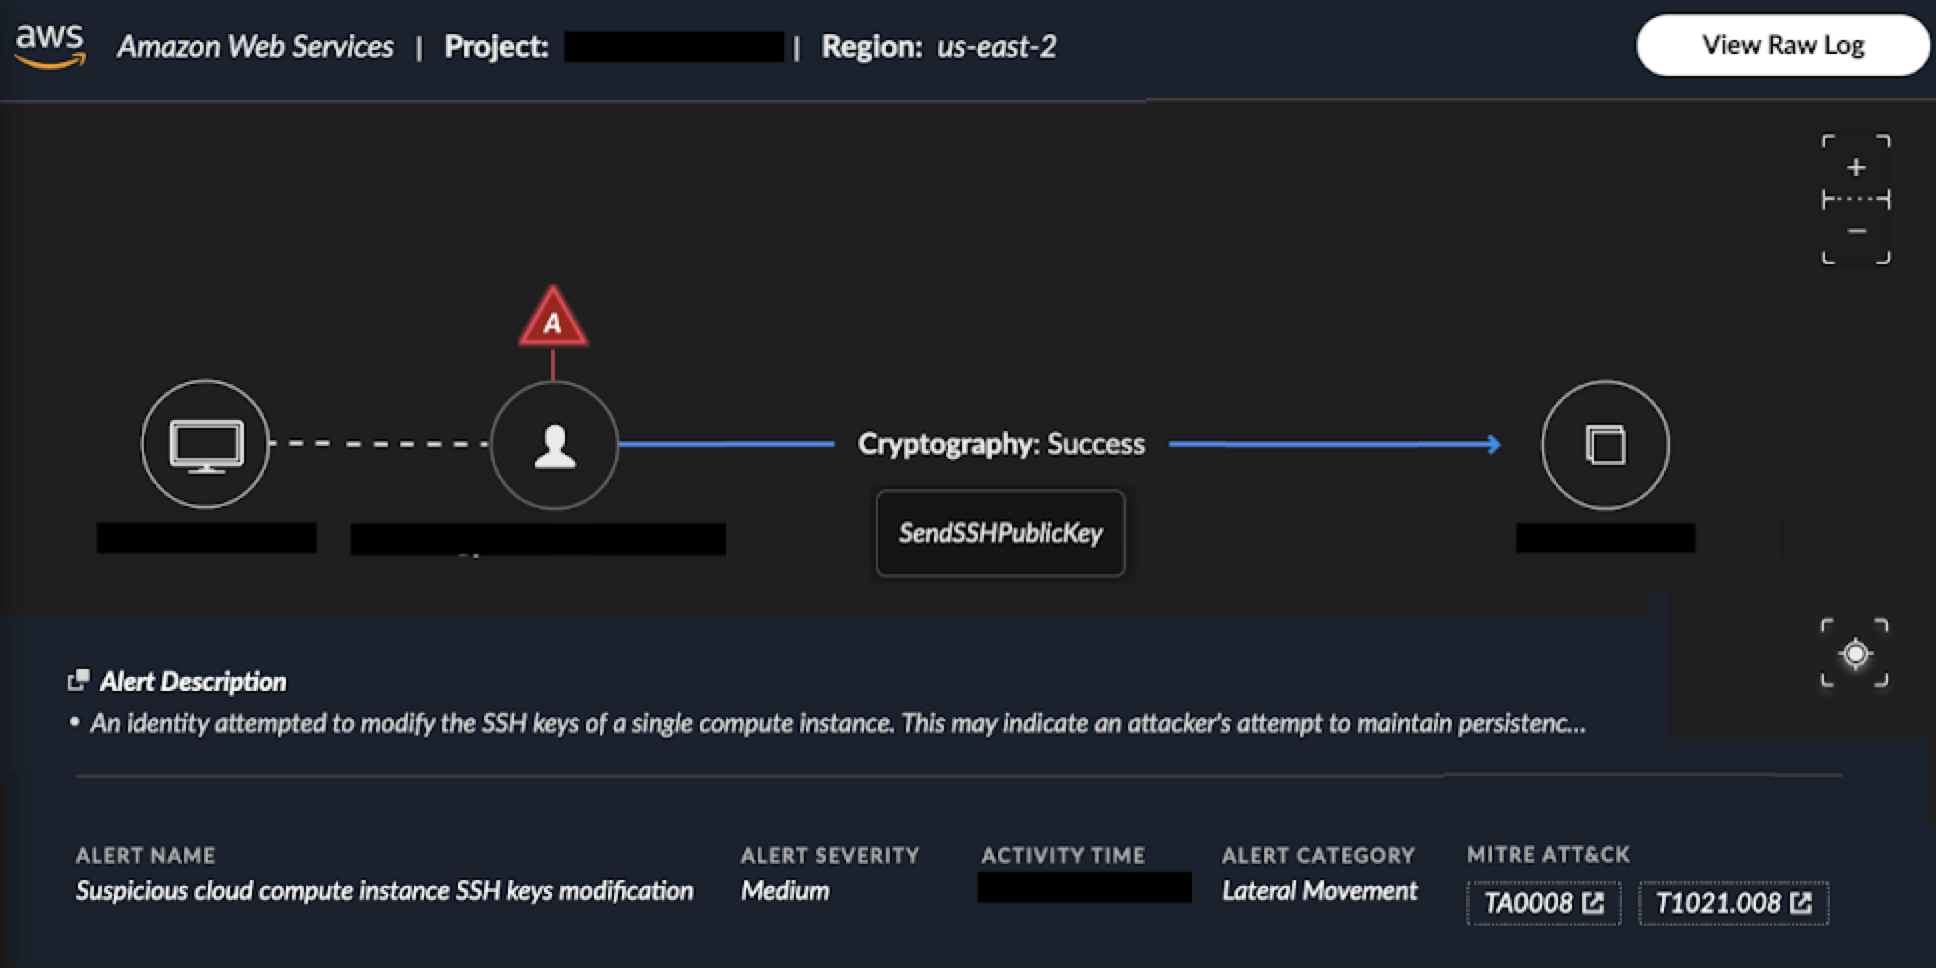 Image 15 is a screenshot of the Amazon Web Services backend showing the alerts for the specific SSH key modification. Some of the information has been redacted. The information includes the alert name, severity, category and the MITRE attack number. 